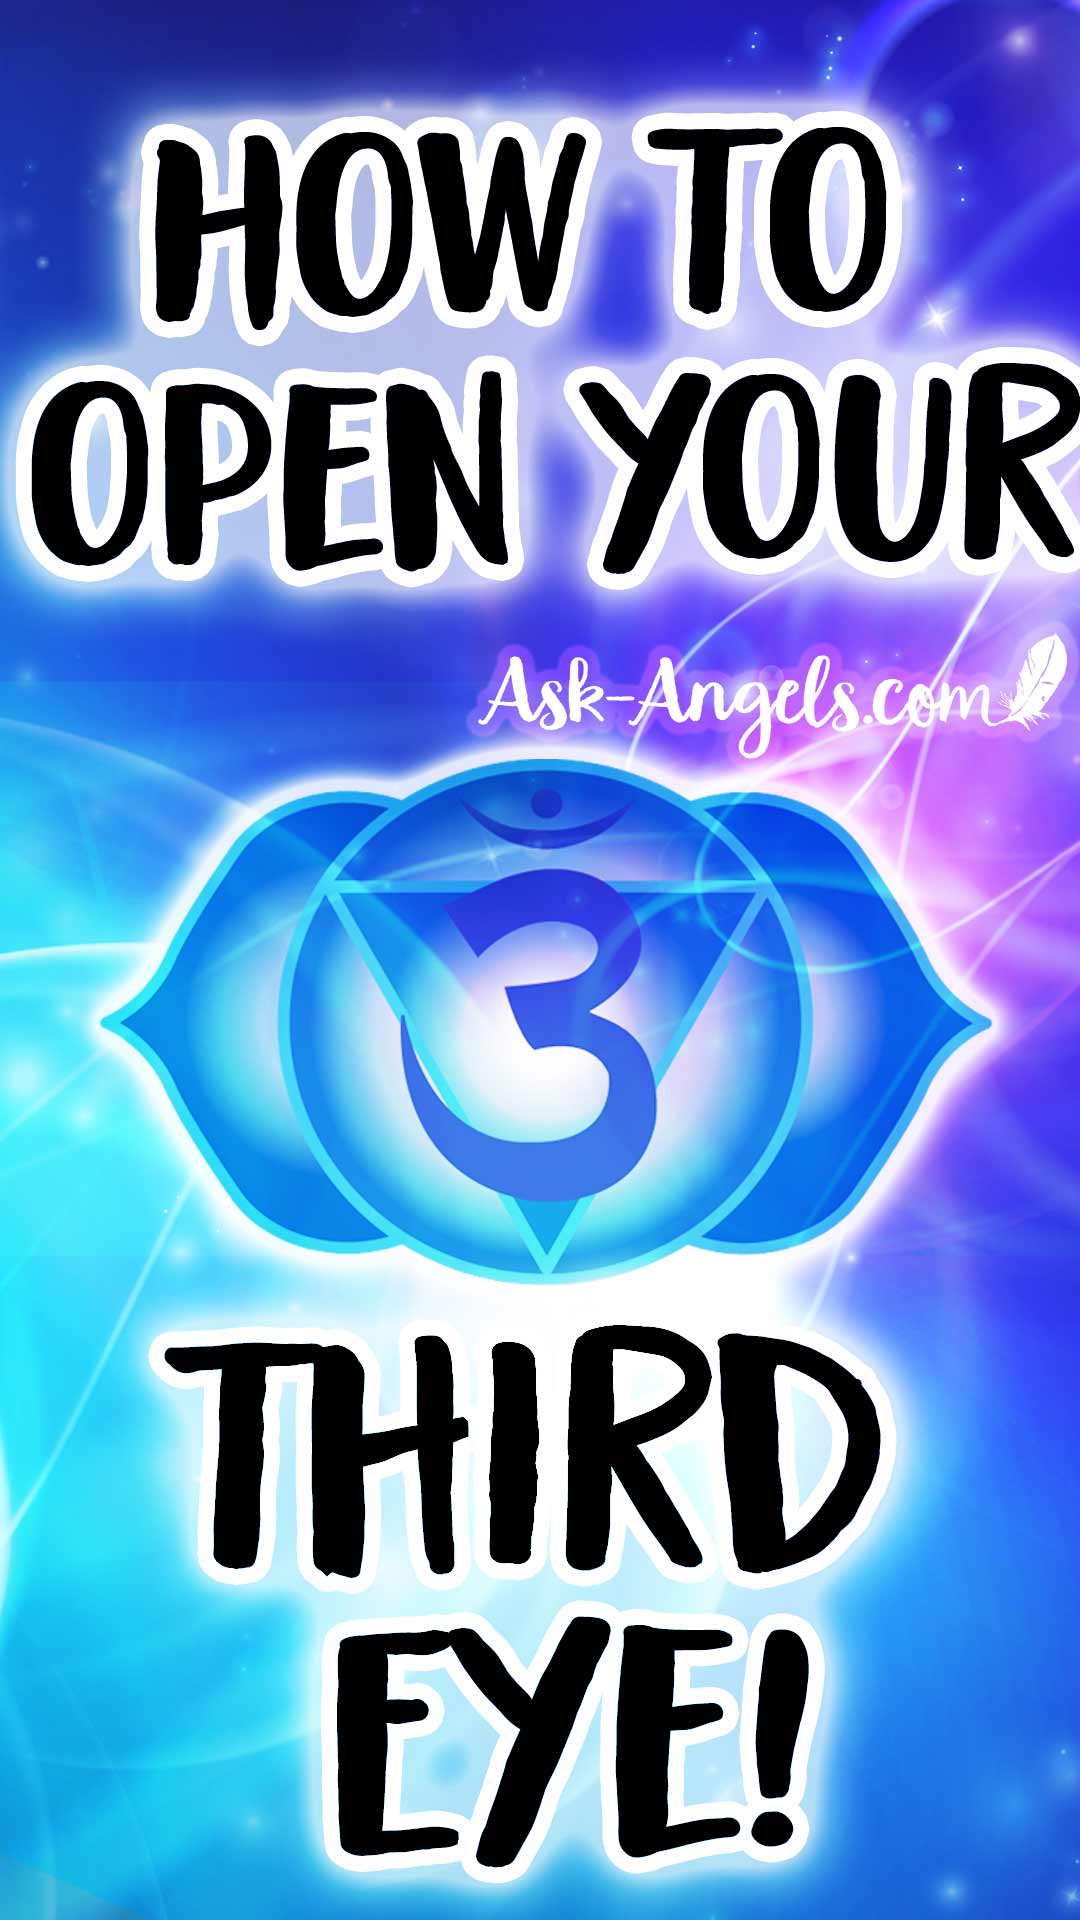 How to Open Your Third Eye